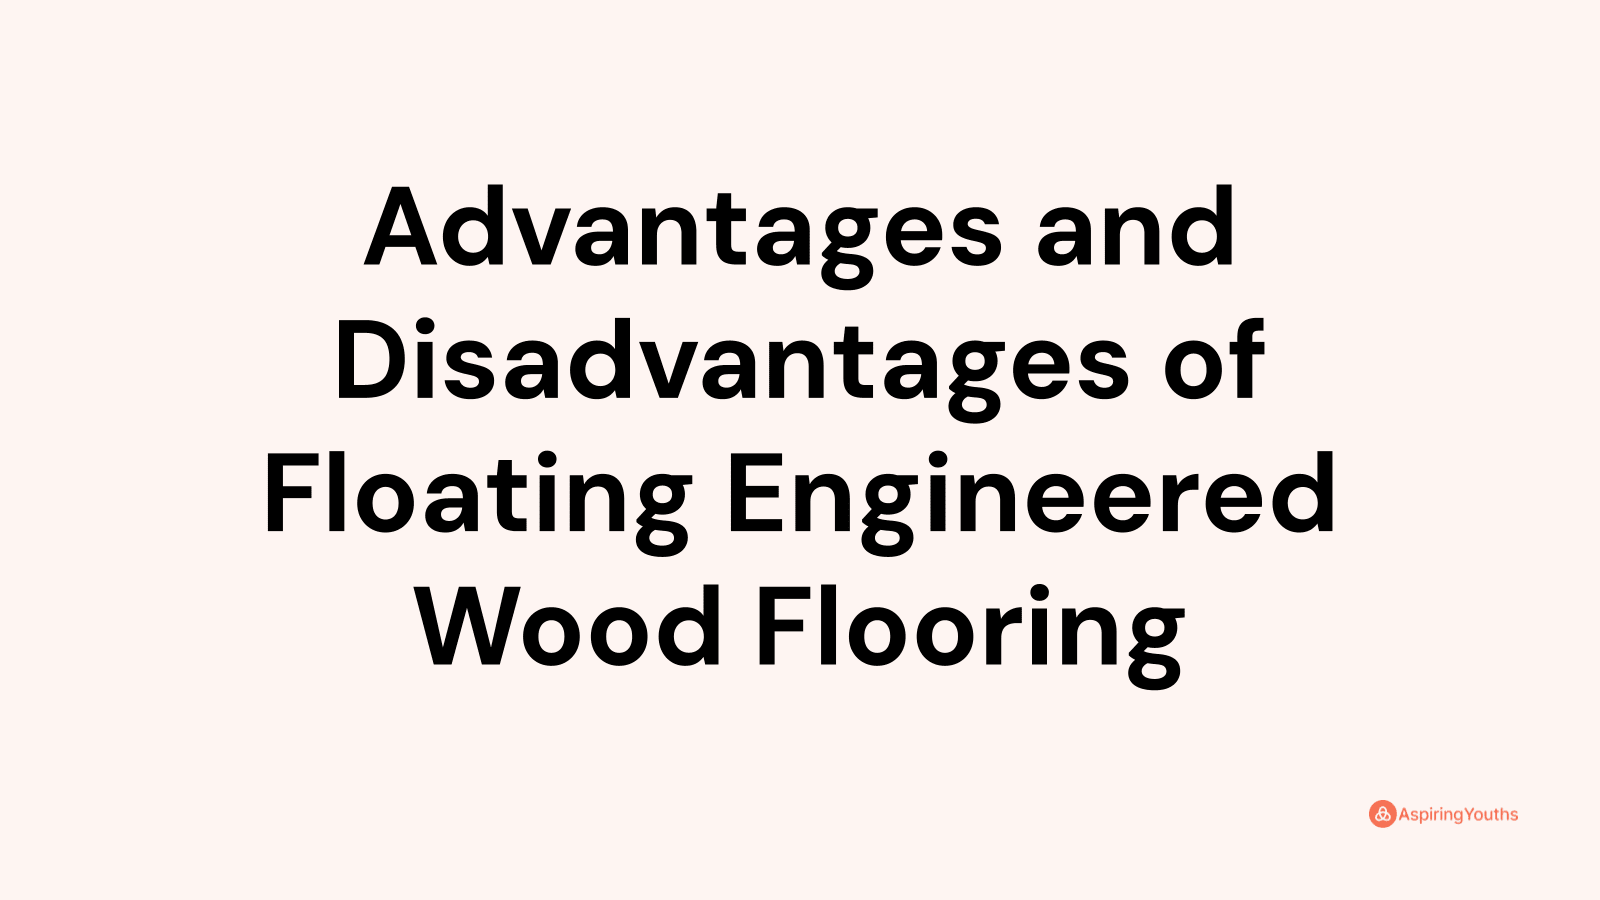 Advantages and disadvantages of Floating Engineered Wood Flooring